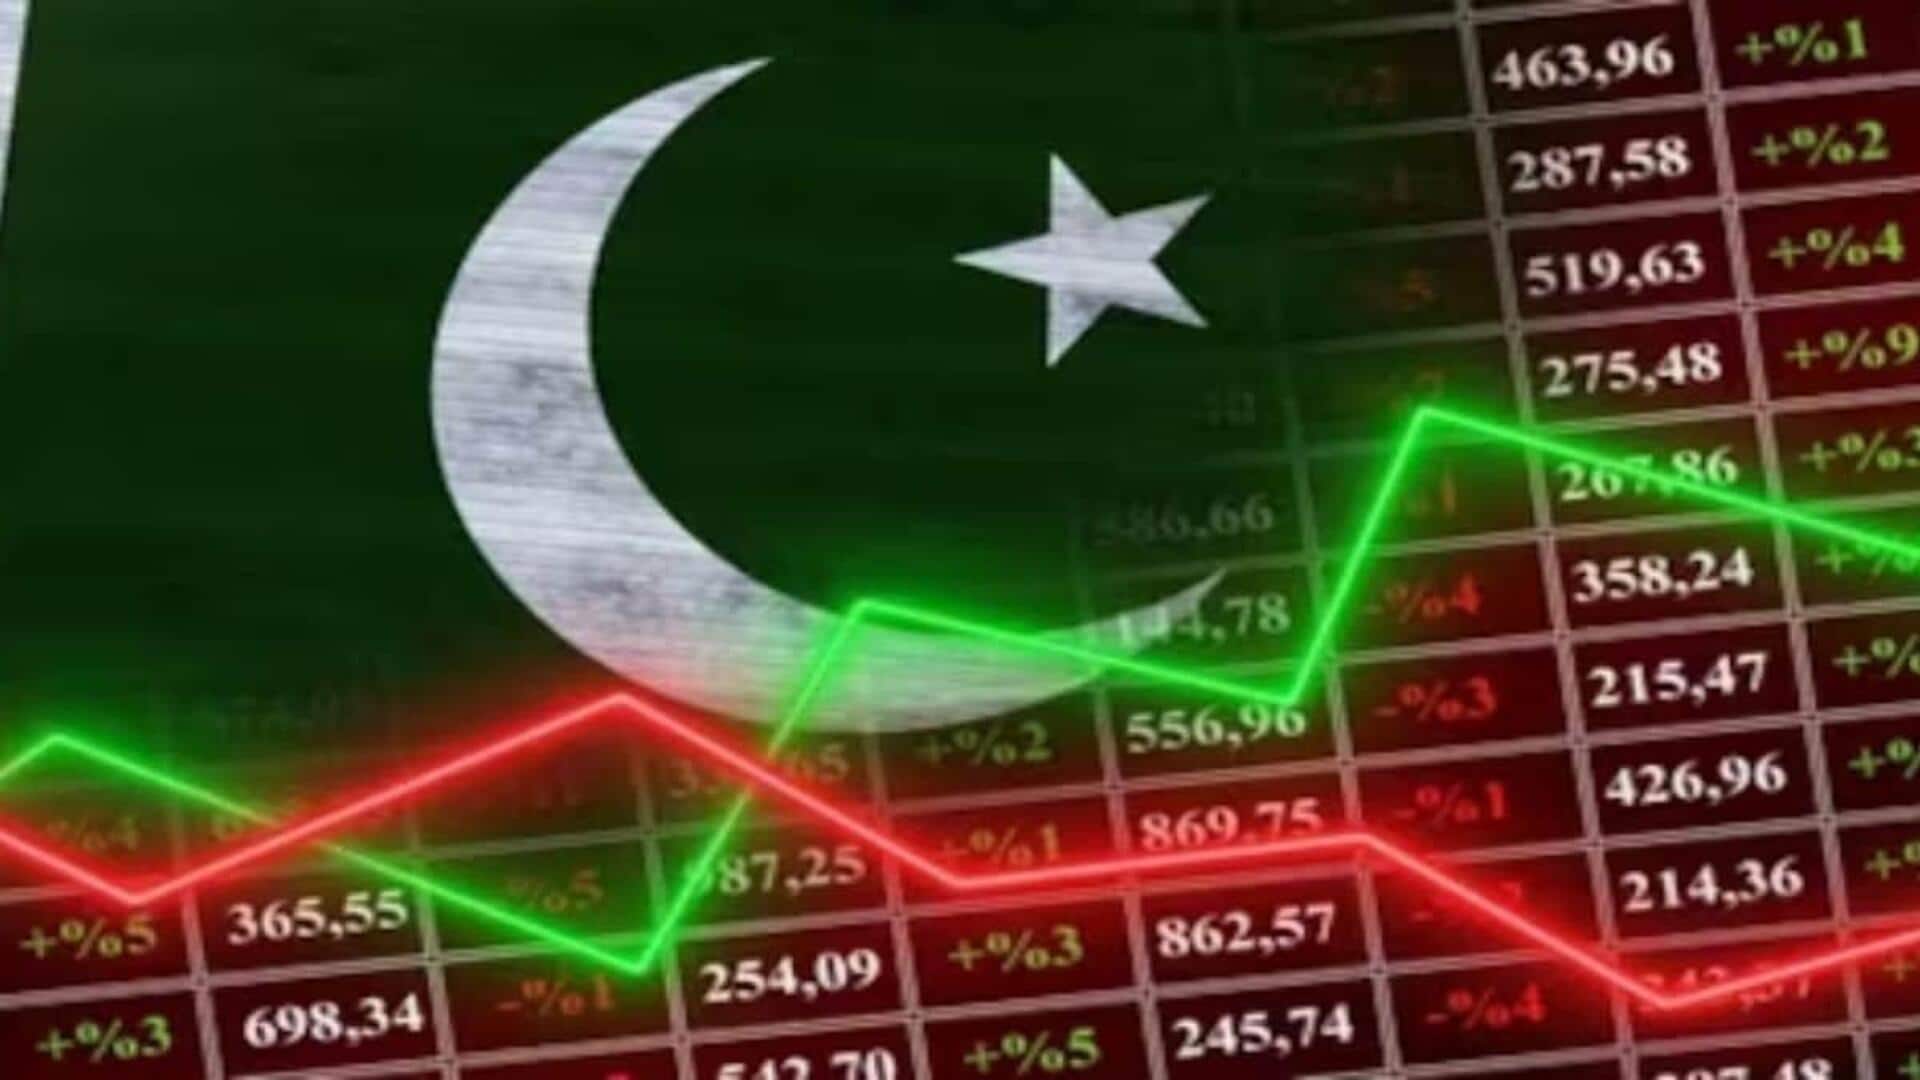 Pakistan fixes interest rate at 22% as inflation nears 33%